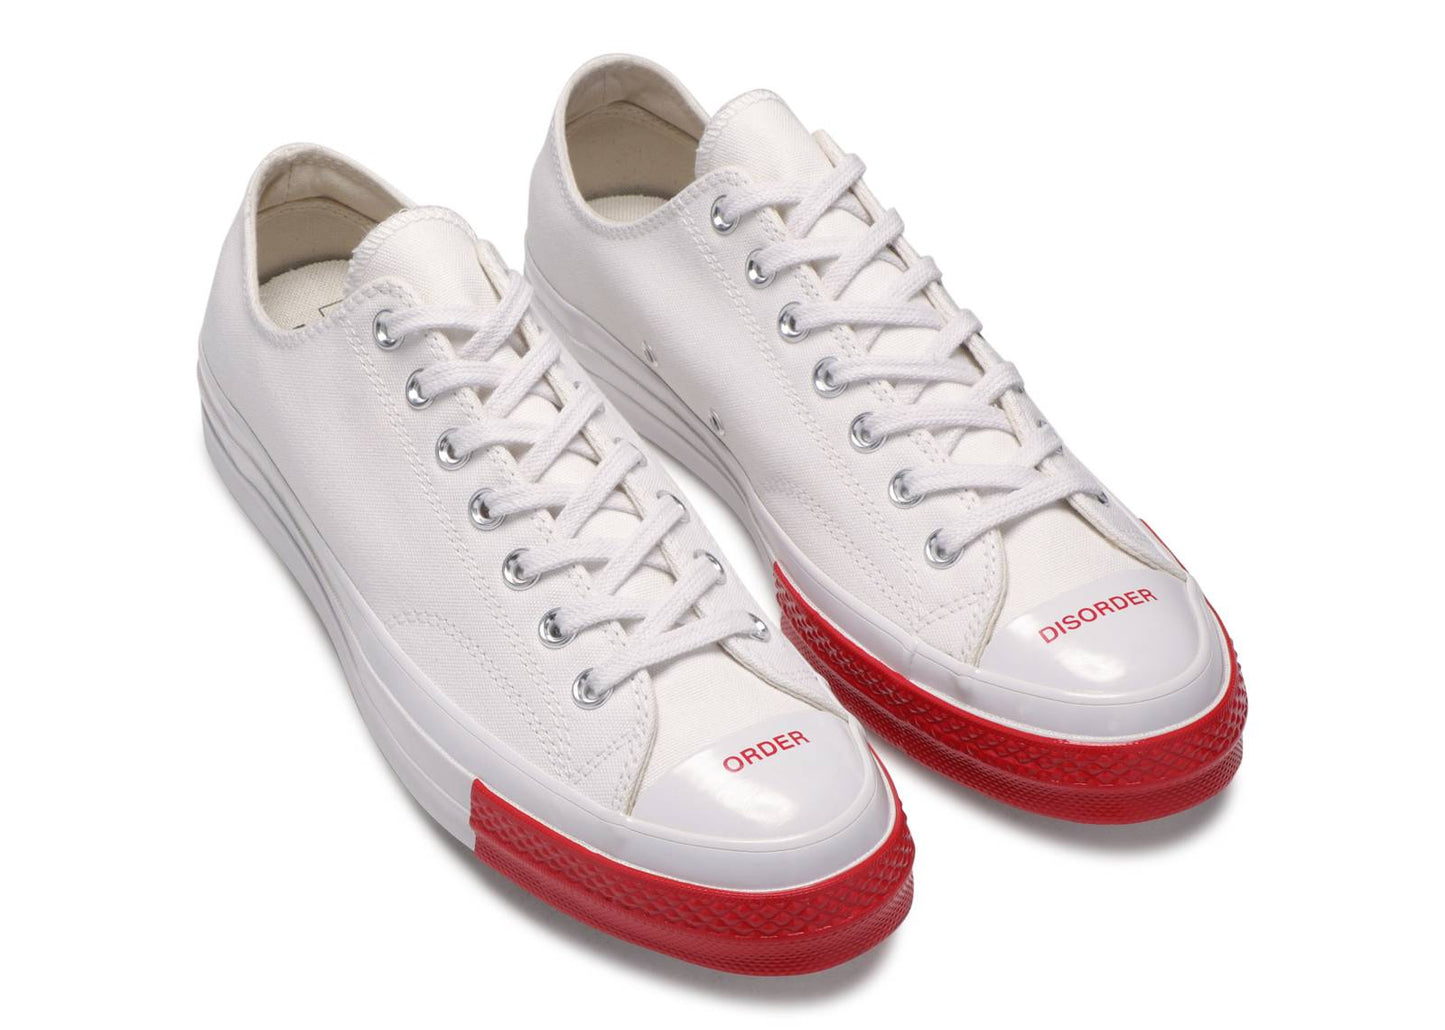 Undercover x Converse Chuck 70 OX Low "White/Red"